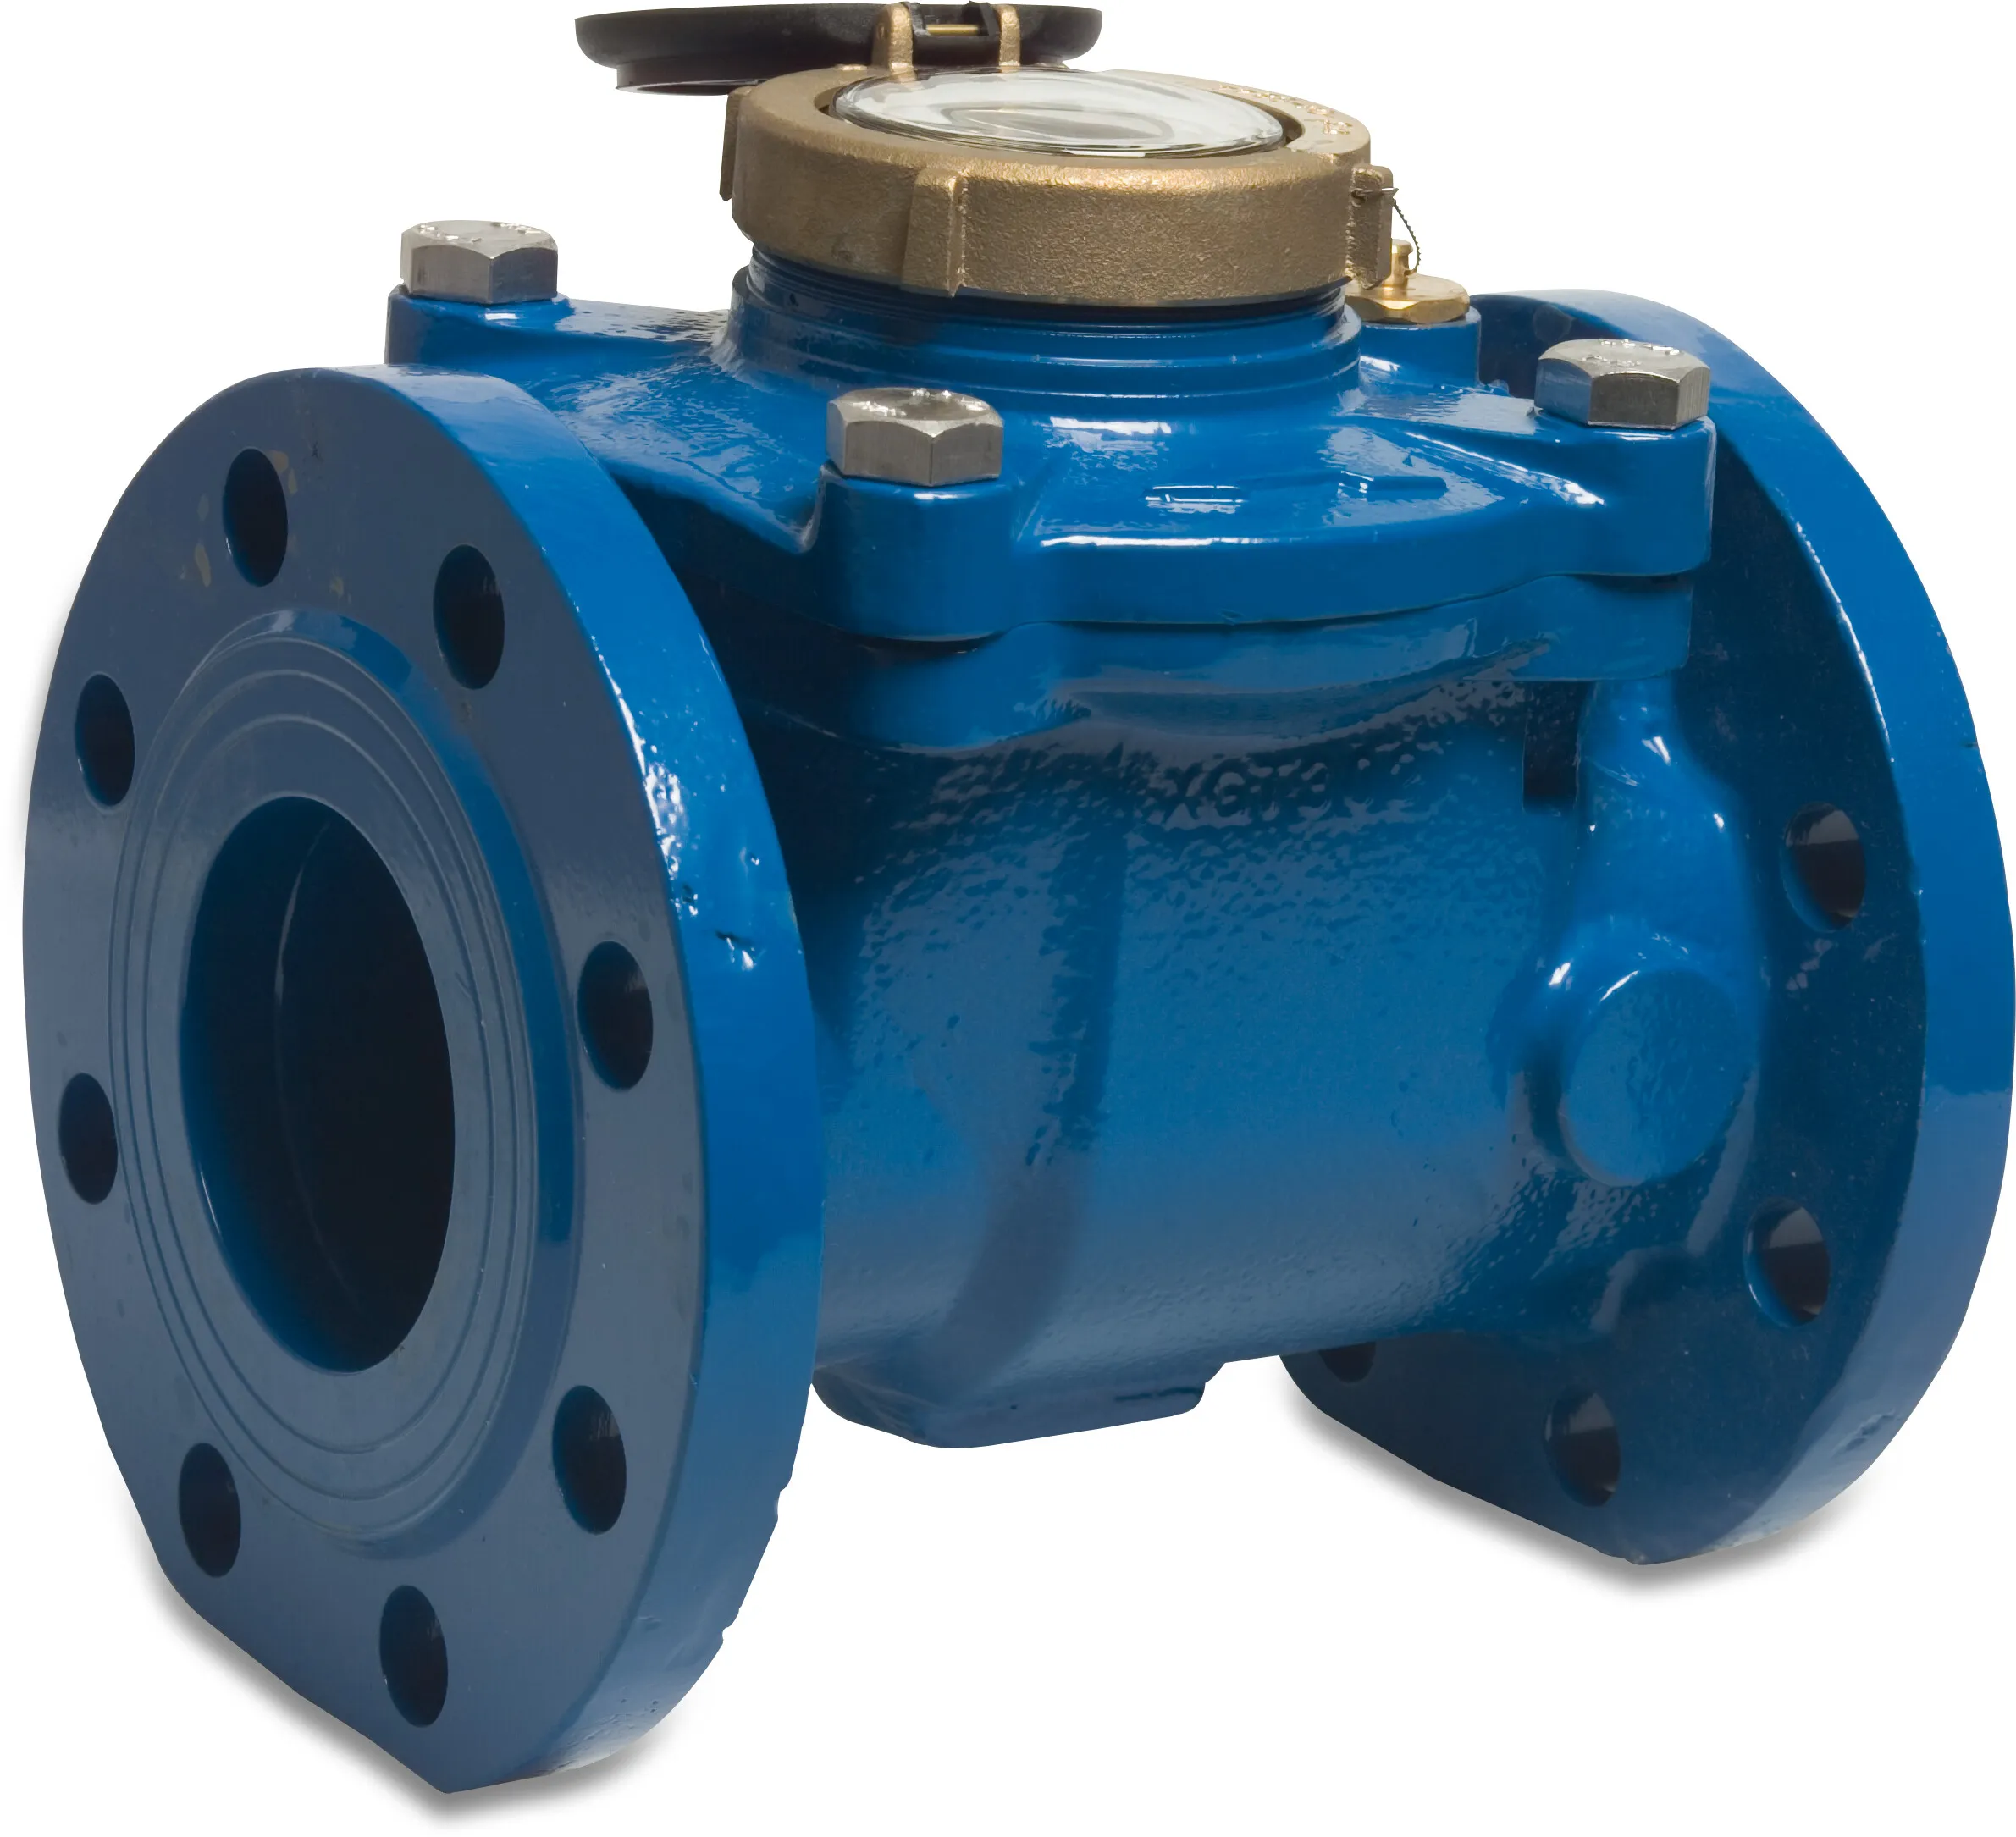 Arad Water meter cast iron polyester coated DN50 DIN flange 16bar 15m³/h blue WRAS type Woltman